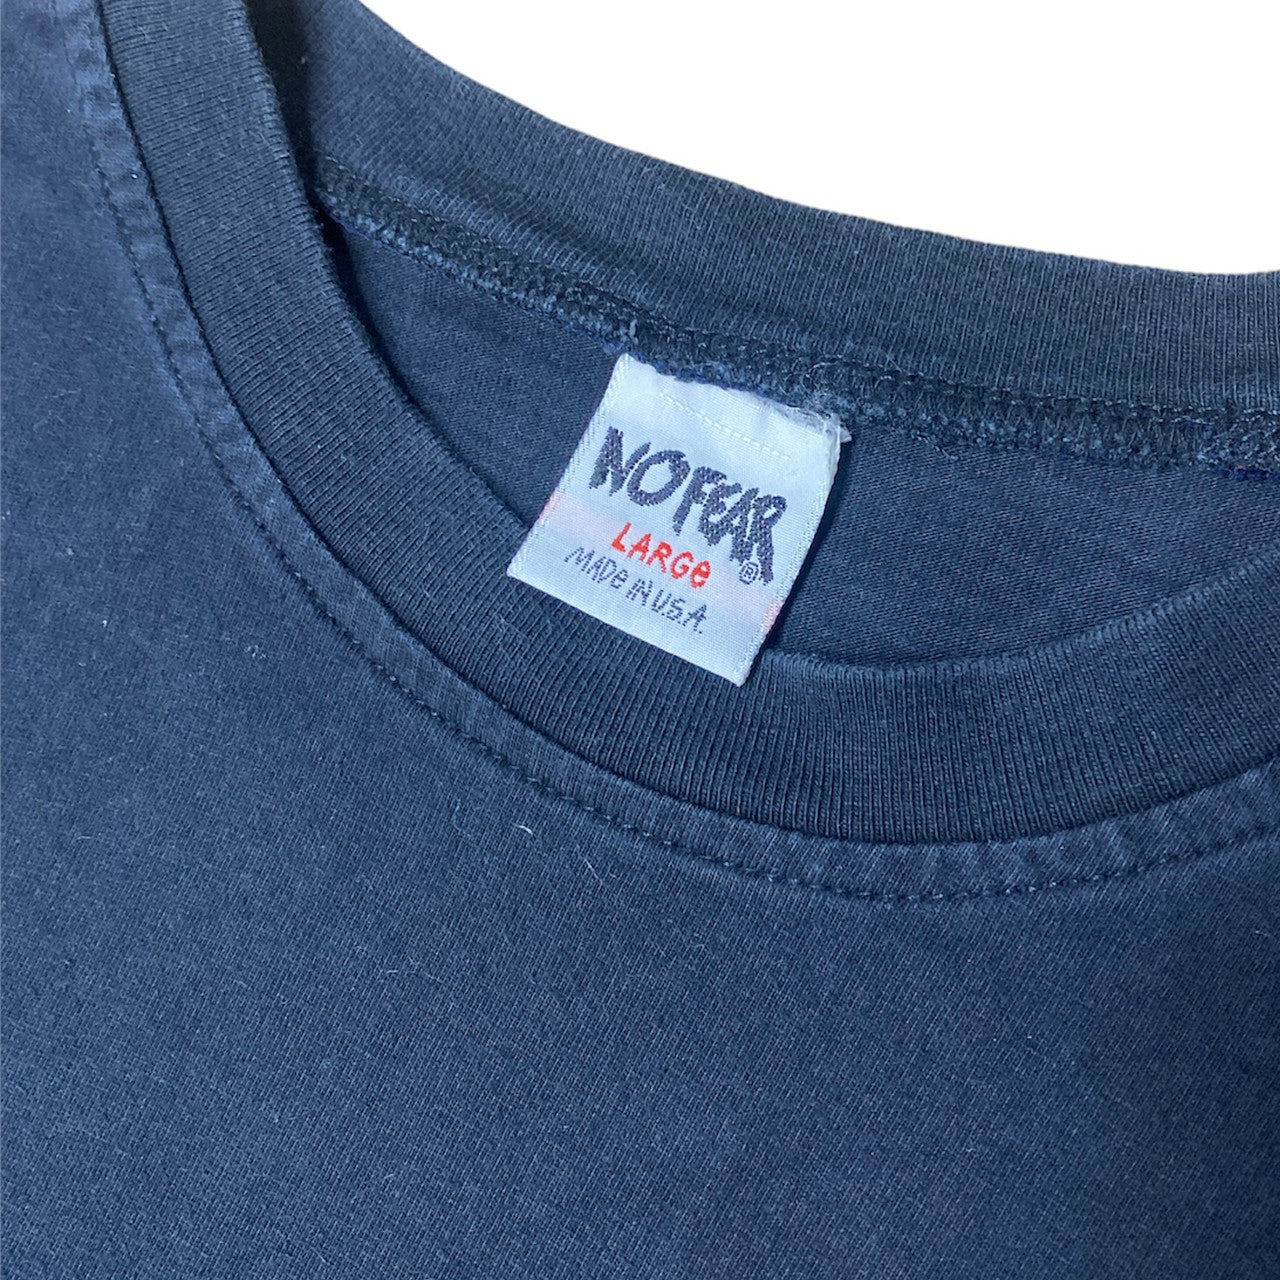 Vintage No Fear Made in USA Tshirt